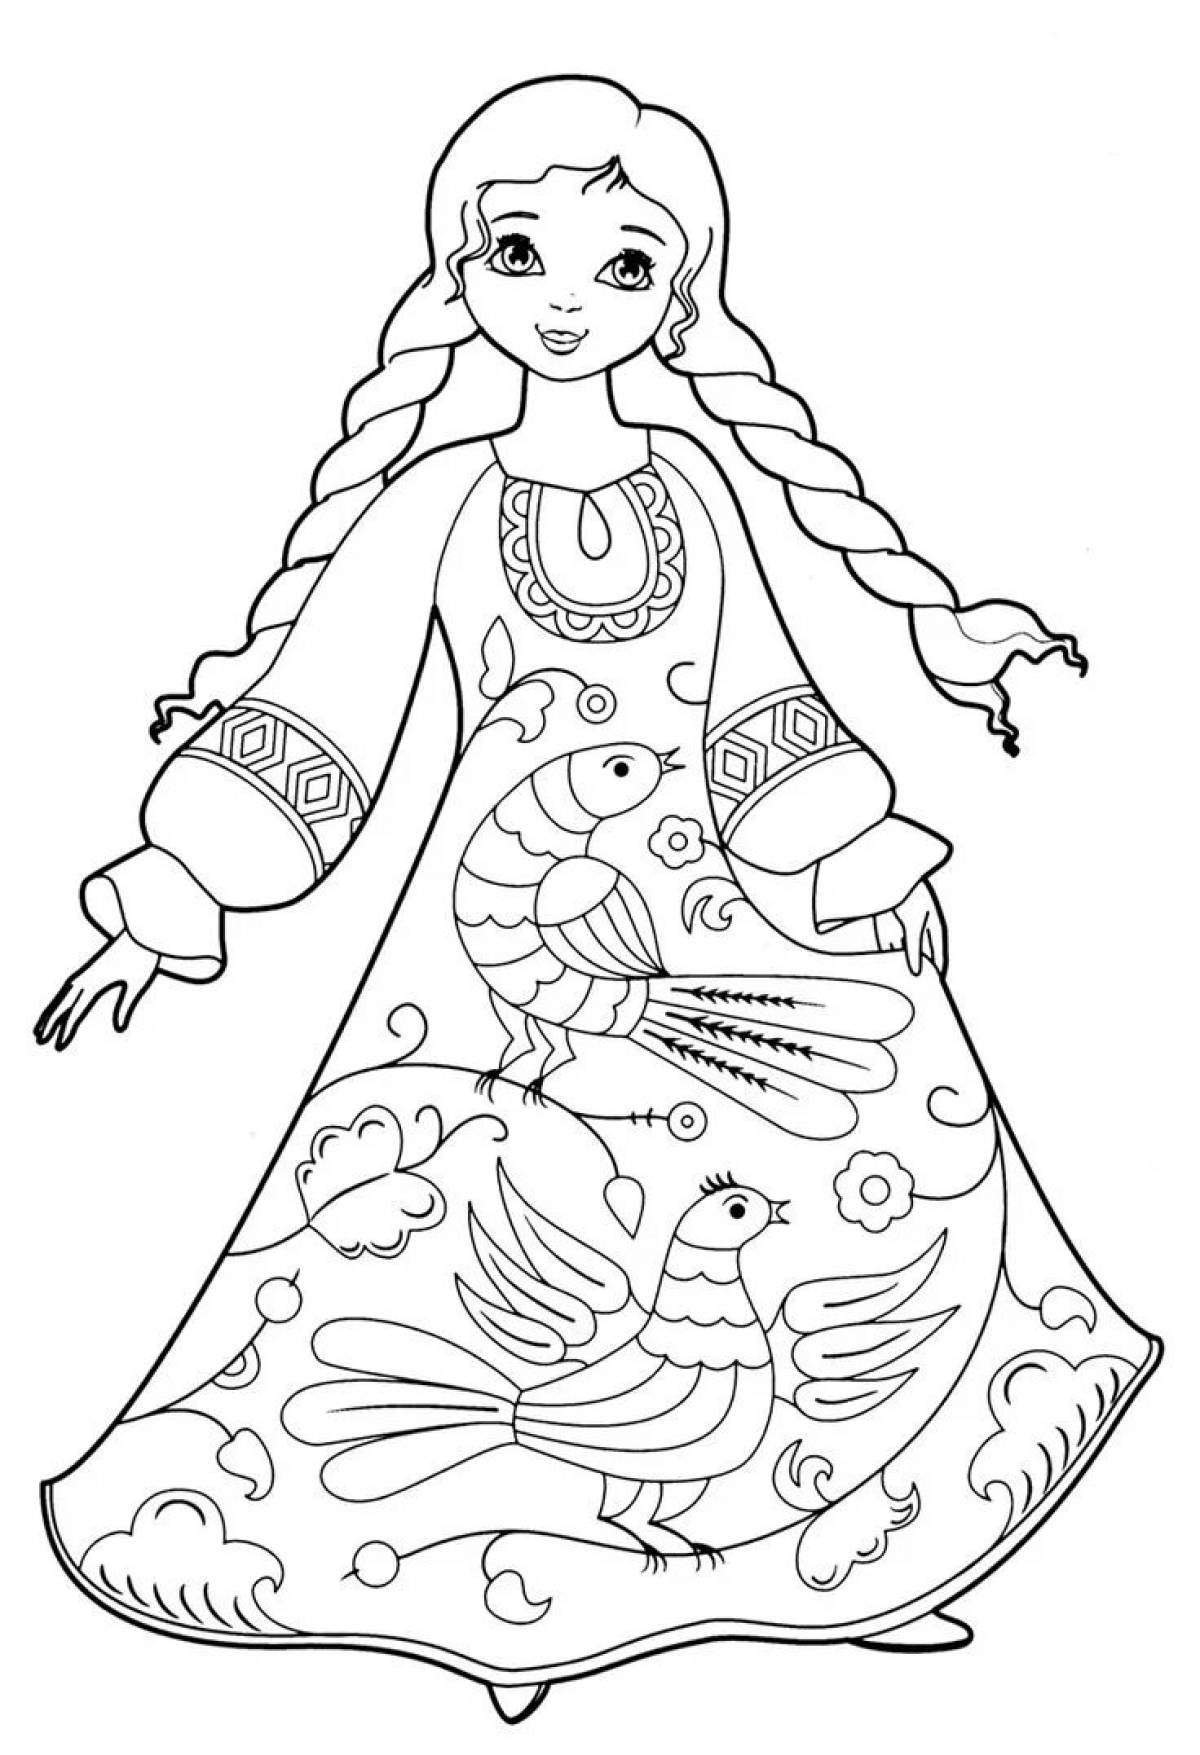 Coloring book spectacular Russian beauty